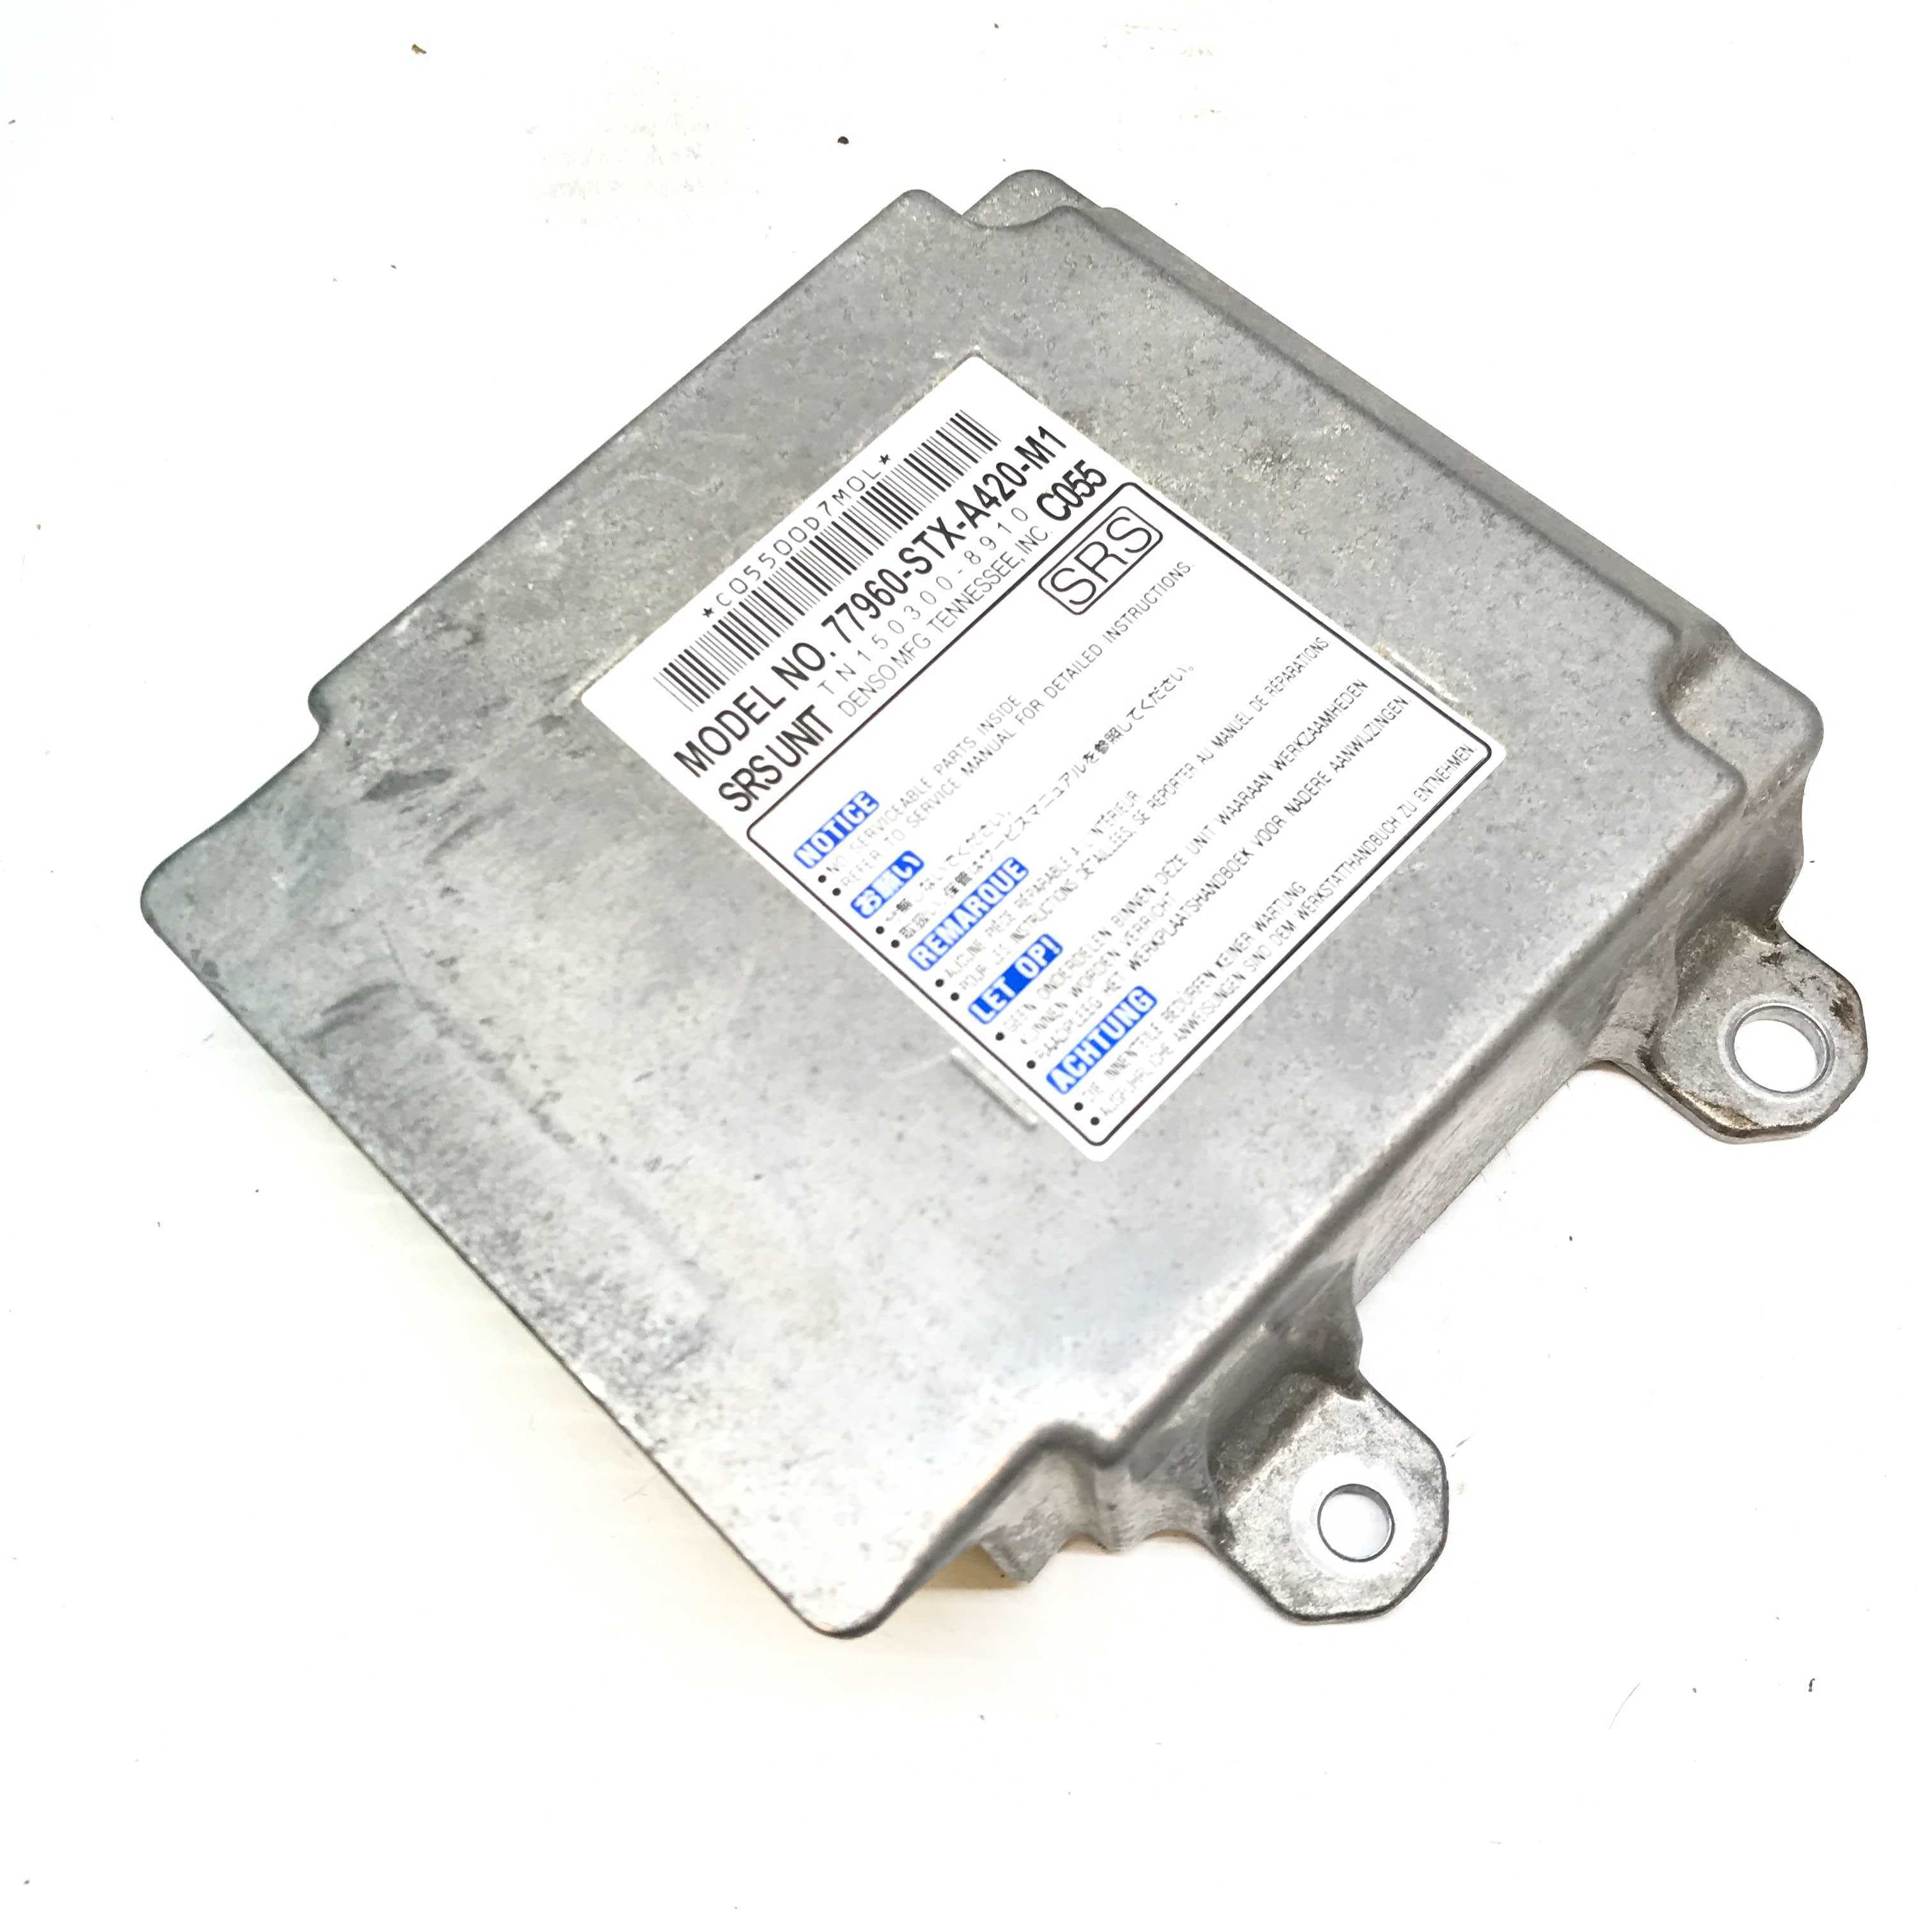 ACURA MDX SRS Airbag Computer Diagnostic Control Module PART #77960STXA420M1